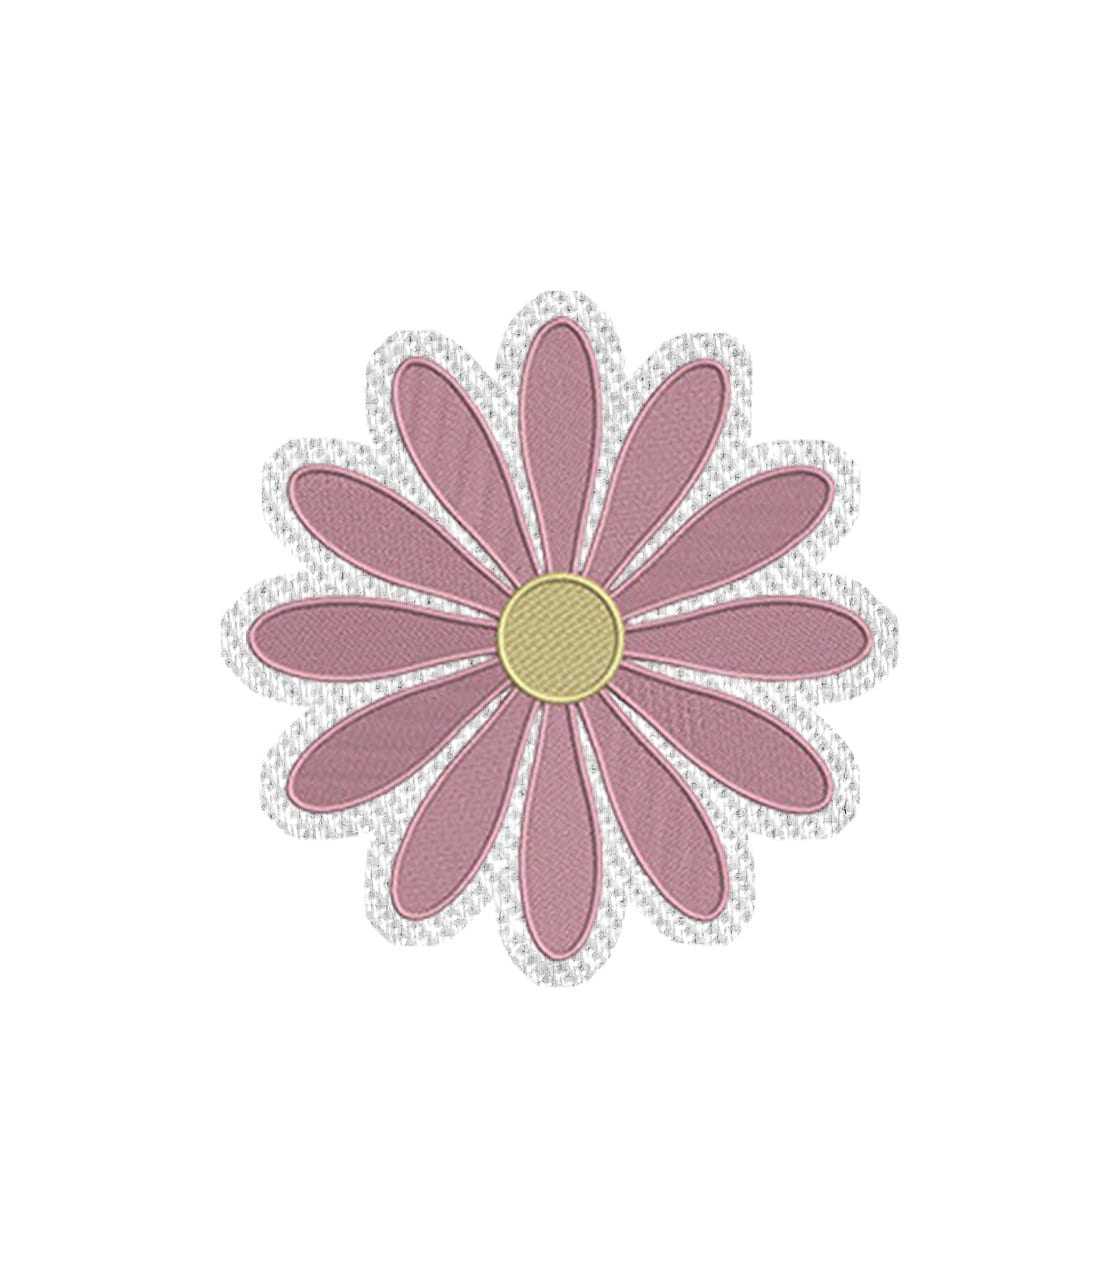 Daisy Flower Iron on Patch / Sew on embroidered patch Floral Garden Flowers Plants Embroidery Women Applique Merit Badge for Clothing Jacket